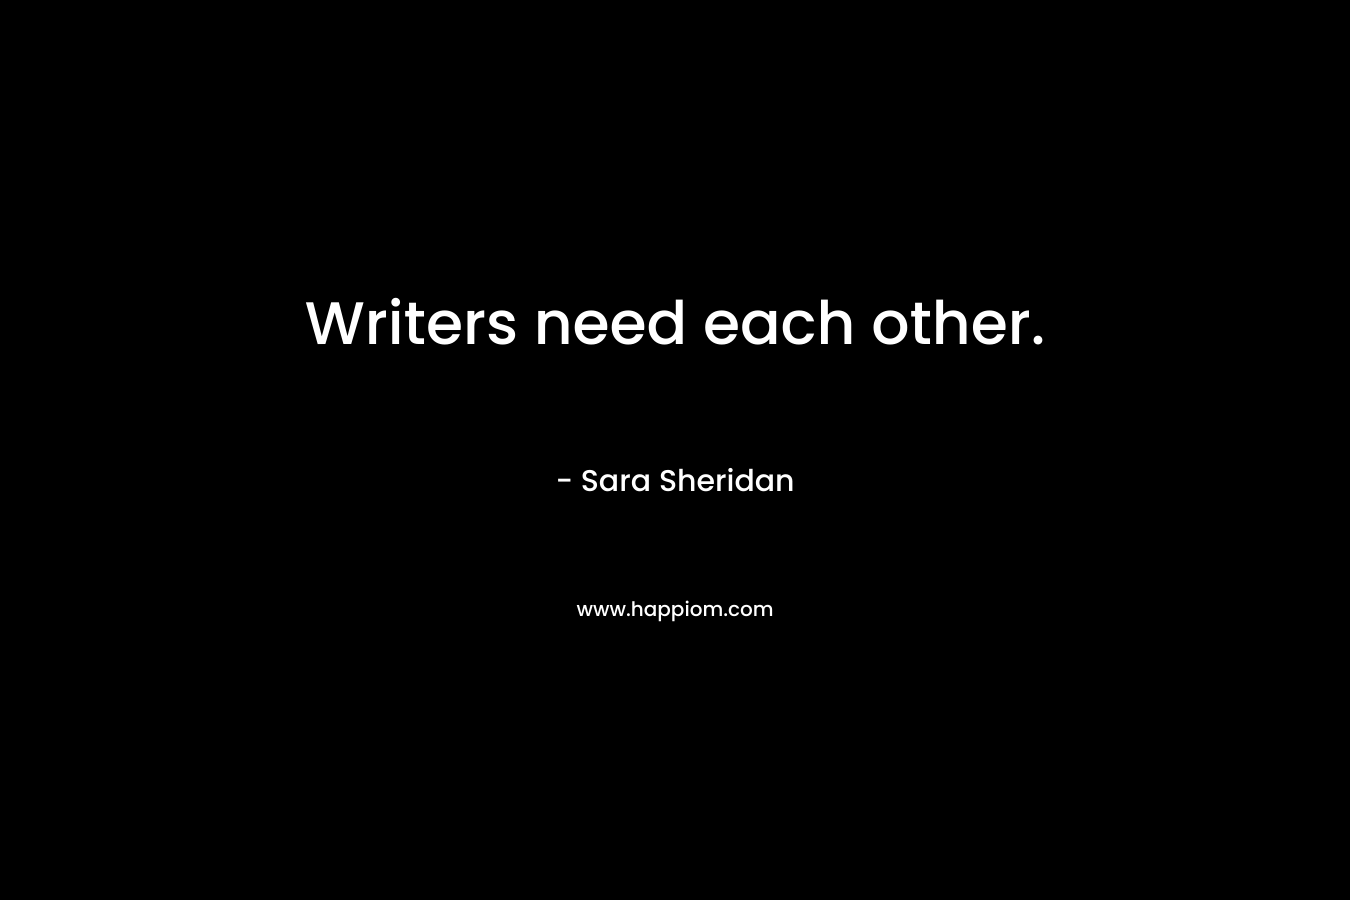 Writers need each other.